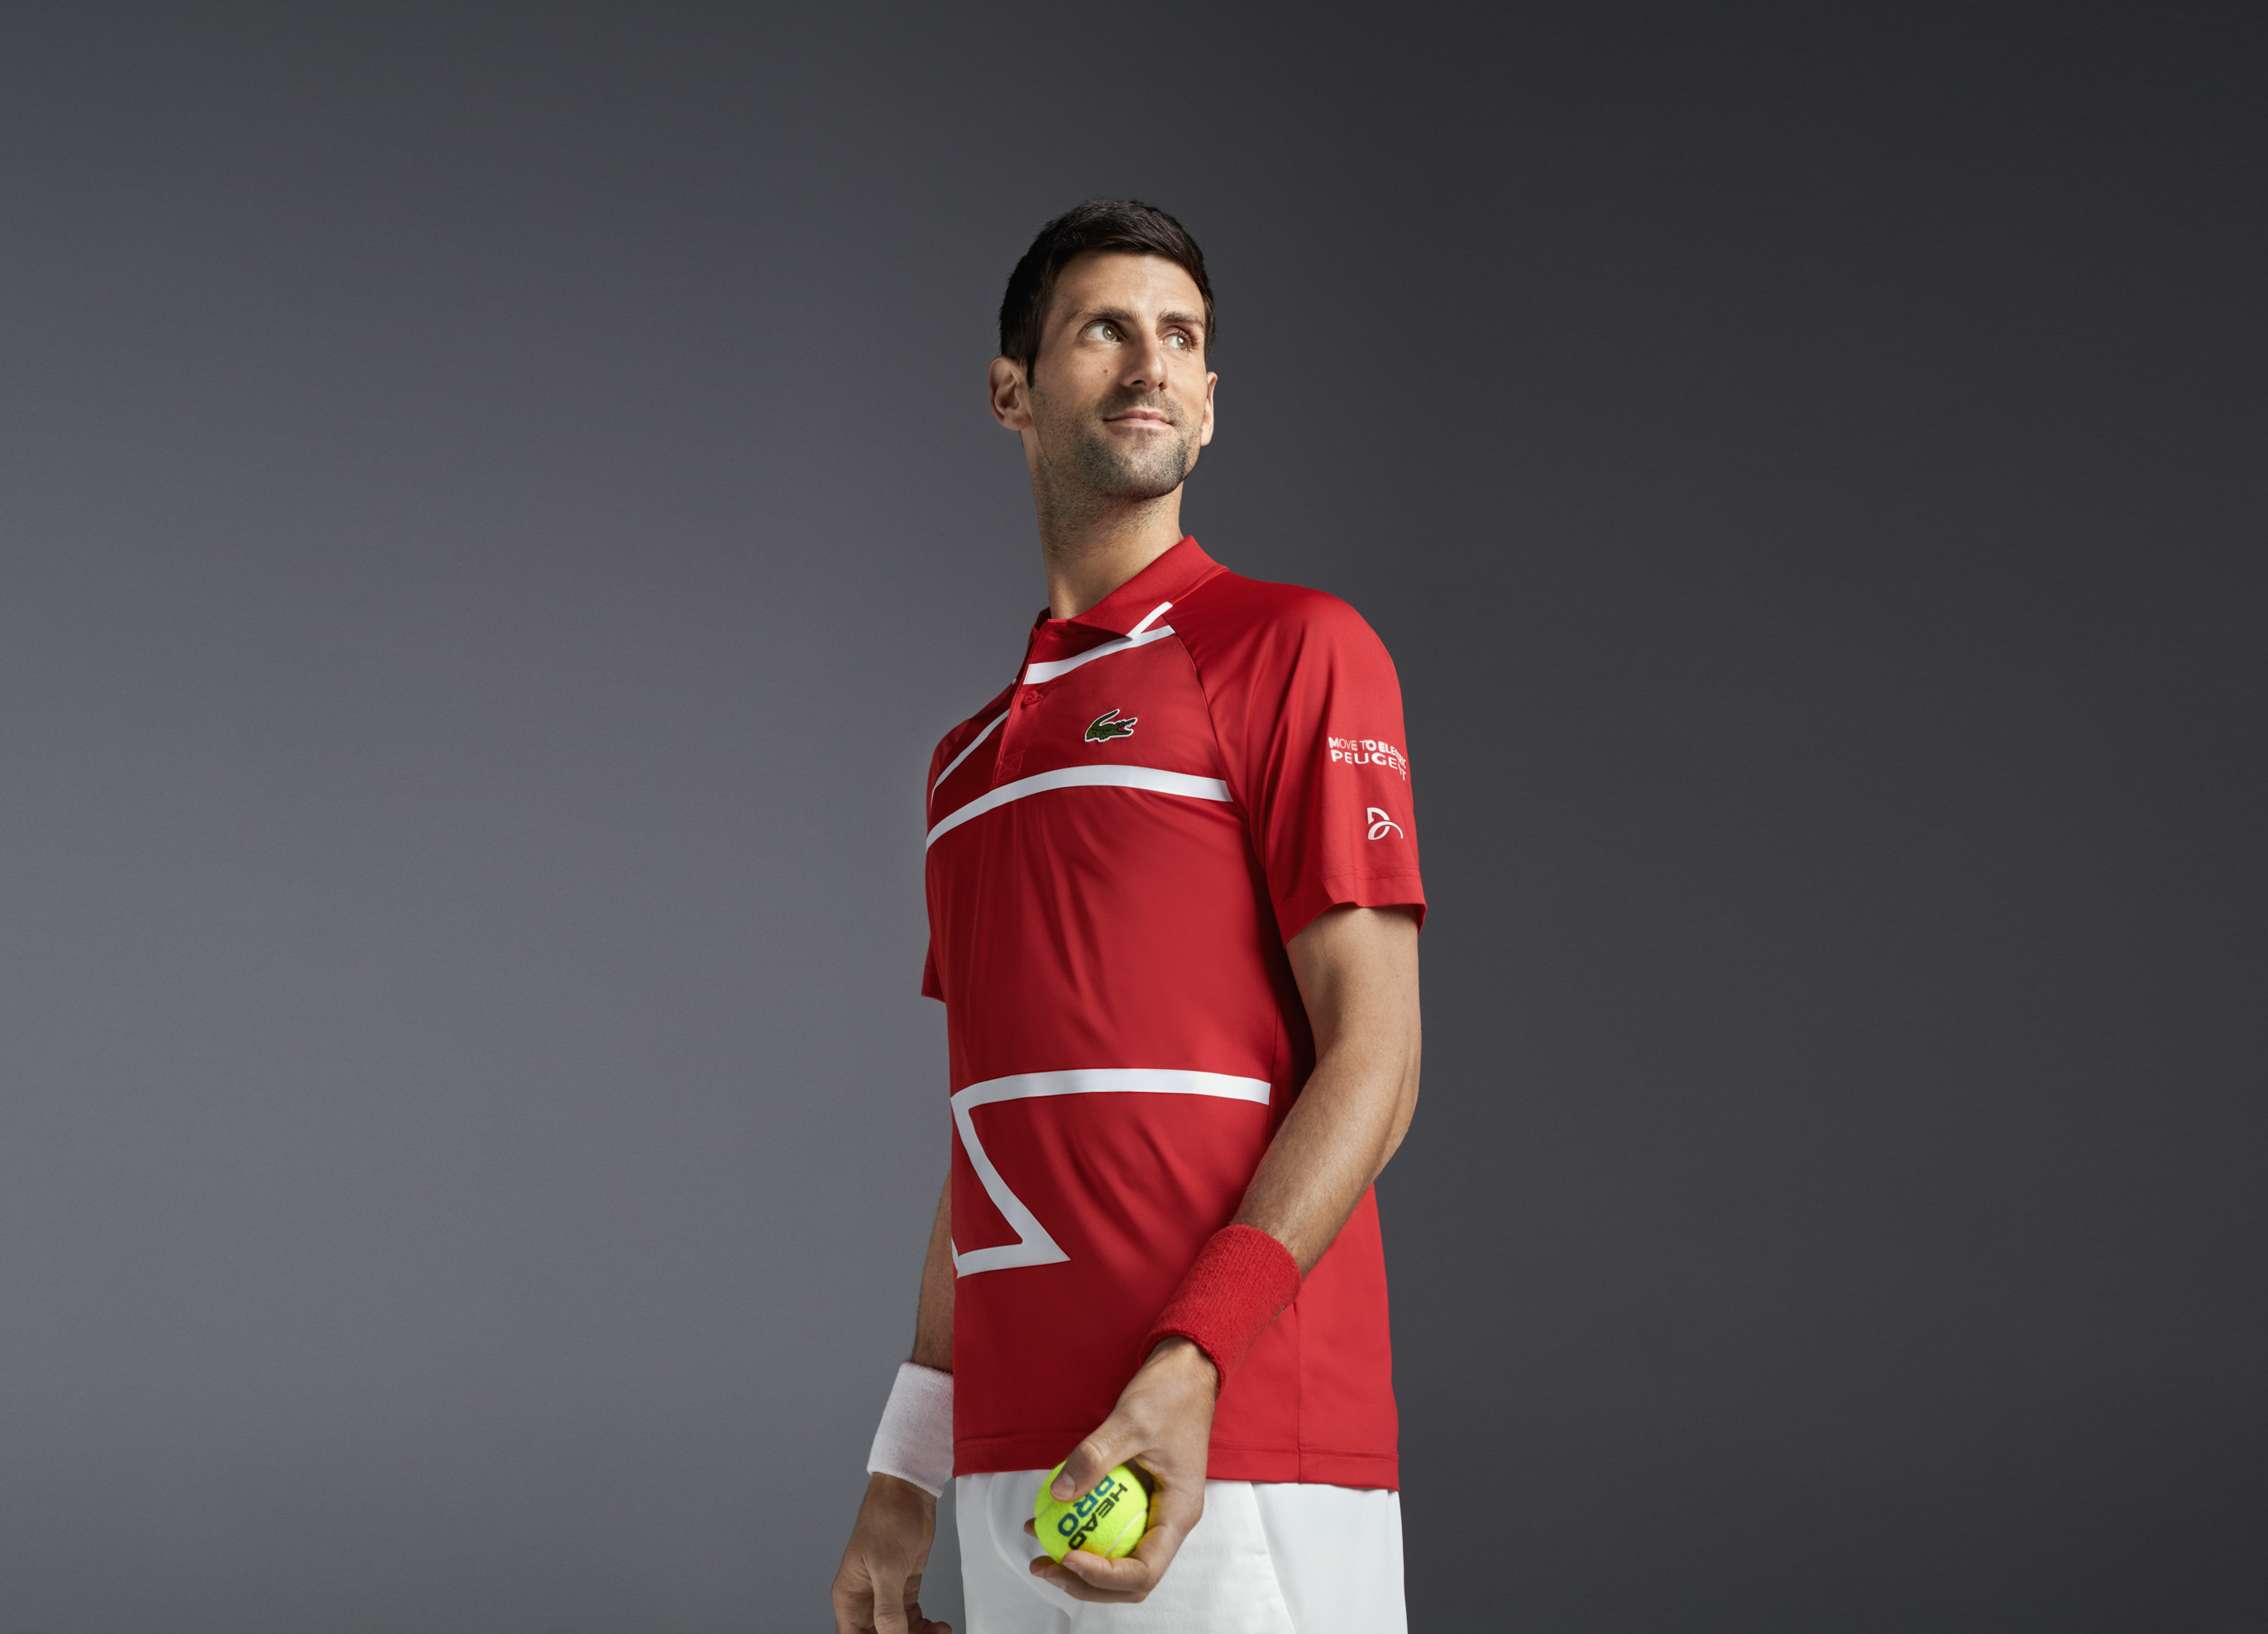 lacoste french open